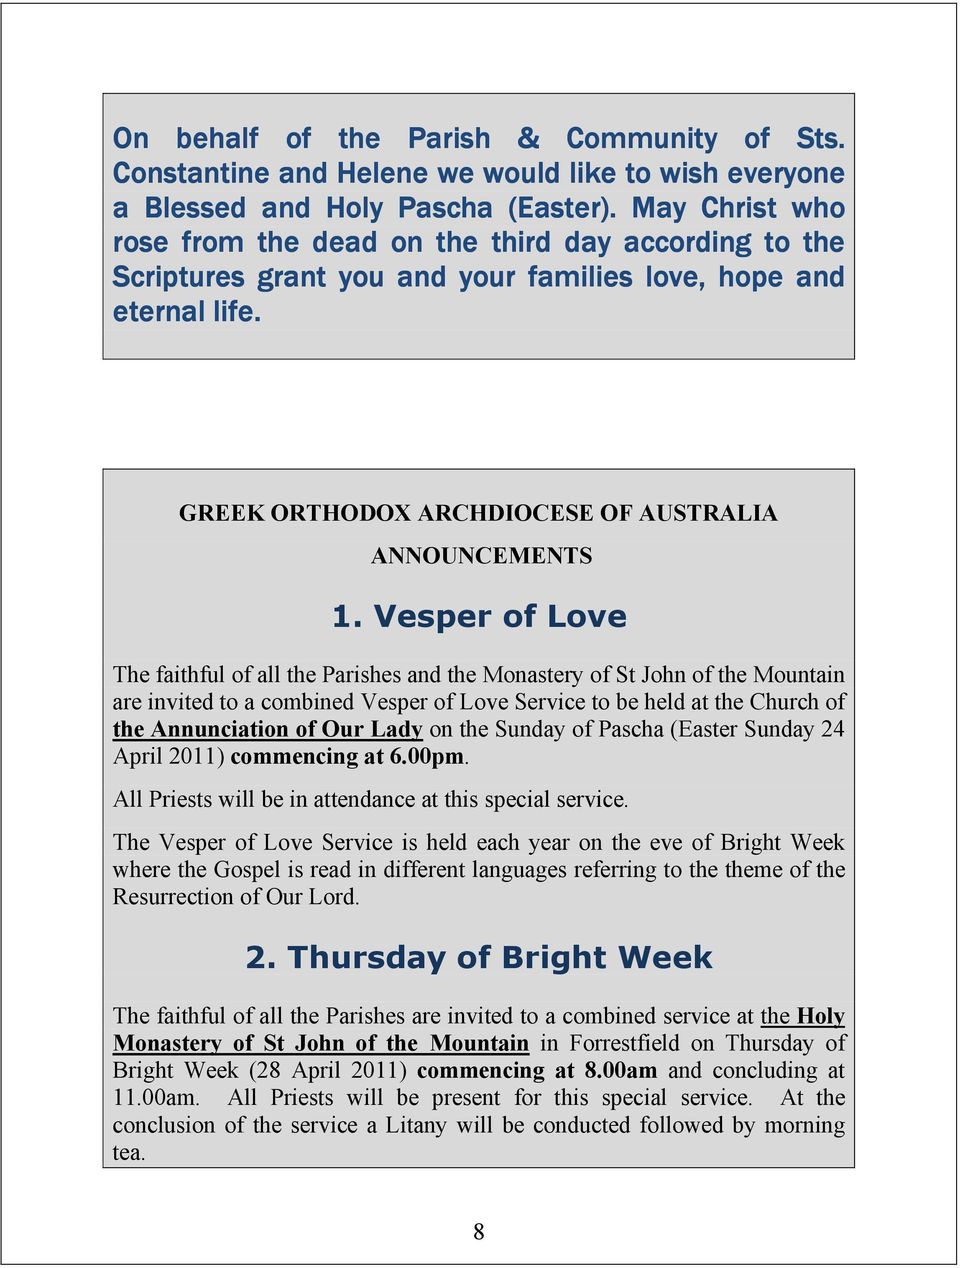 Vesper of Love The faithful of all the Parishes and the Monastery of St John of the Mountain are invited to a combined Vesper of Love Service to be held at the Church of the Annunciation of Our Lady